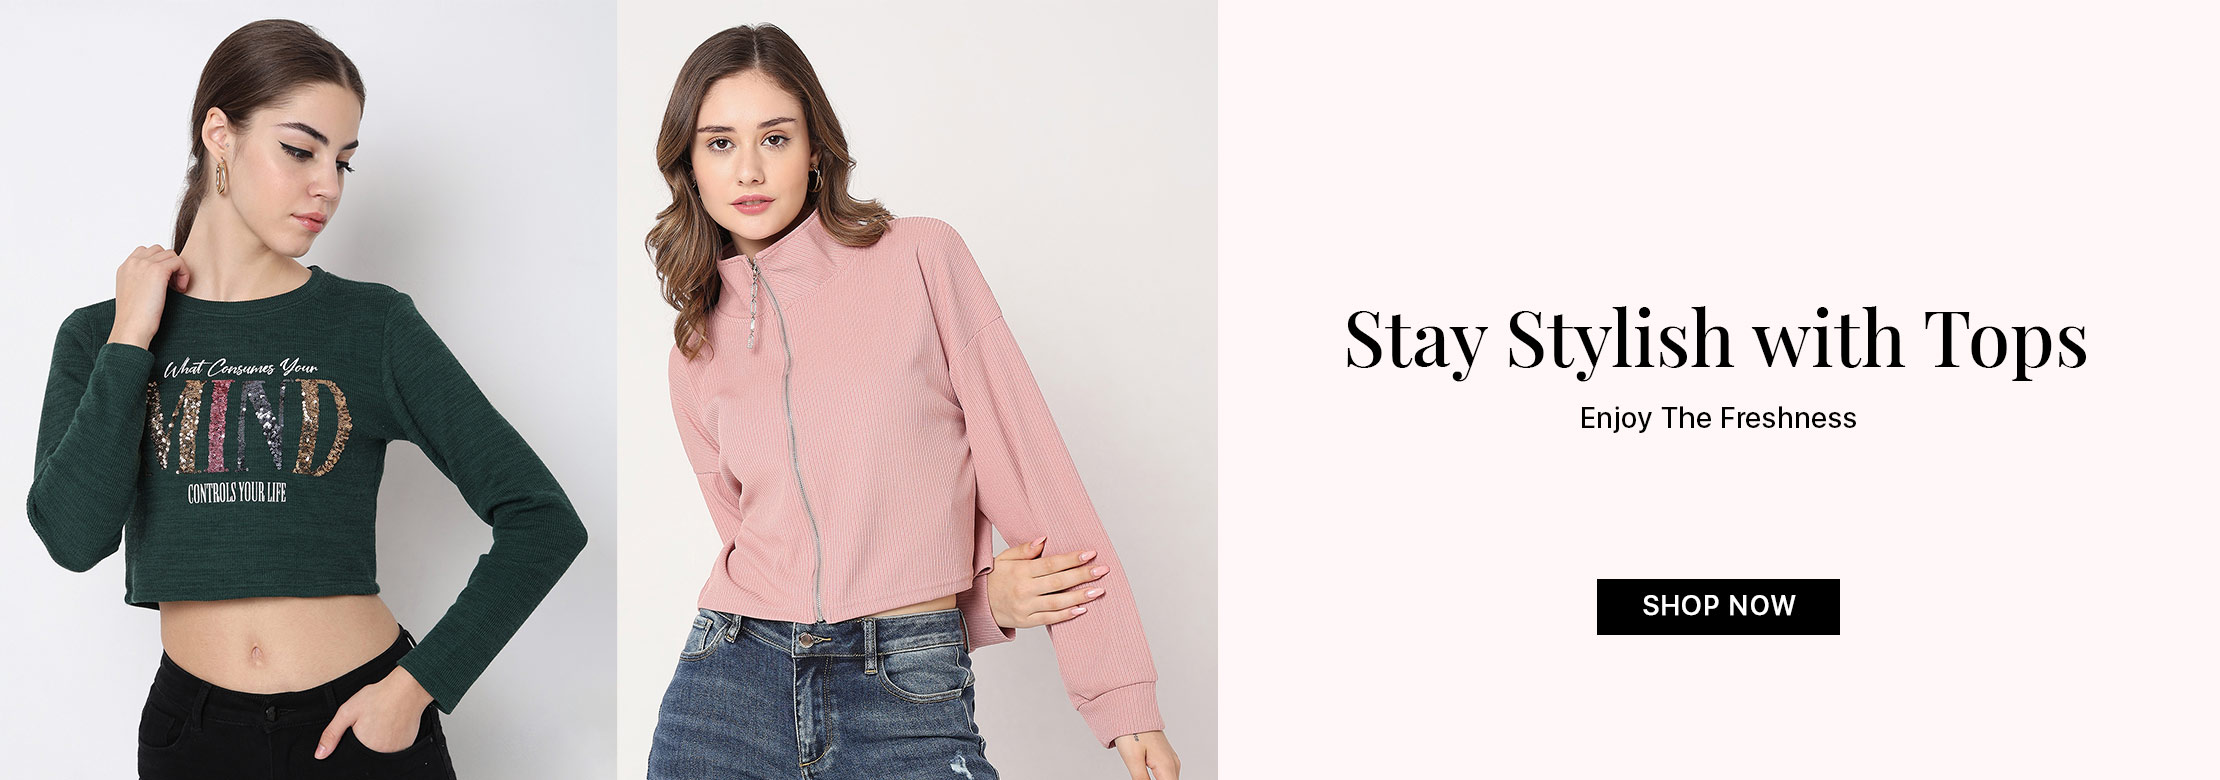 Stay Stylish with Tops